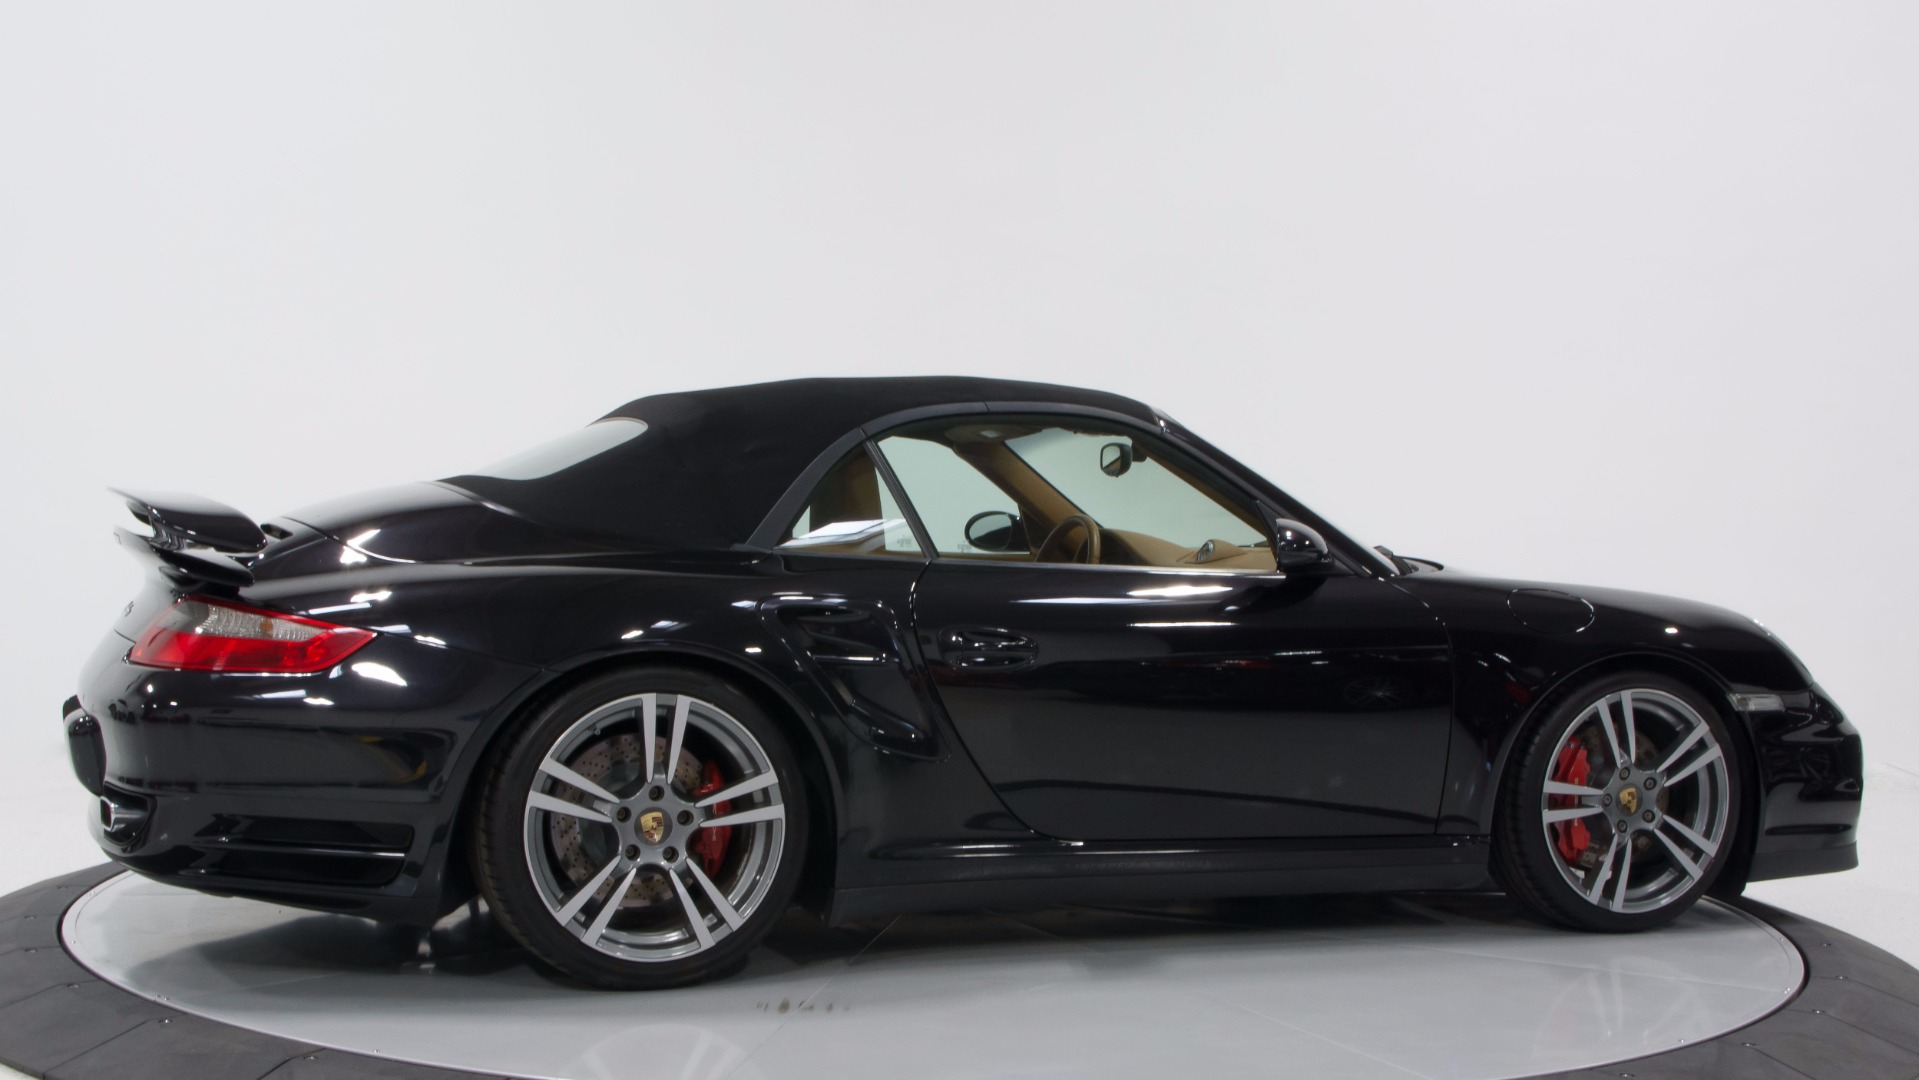 Used 2008 Porsche 911 Turbo For Sale (Sold)